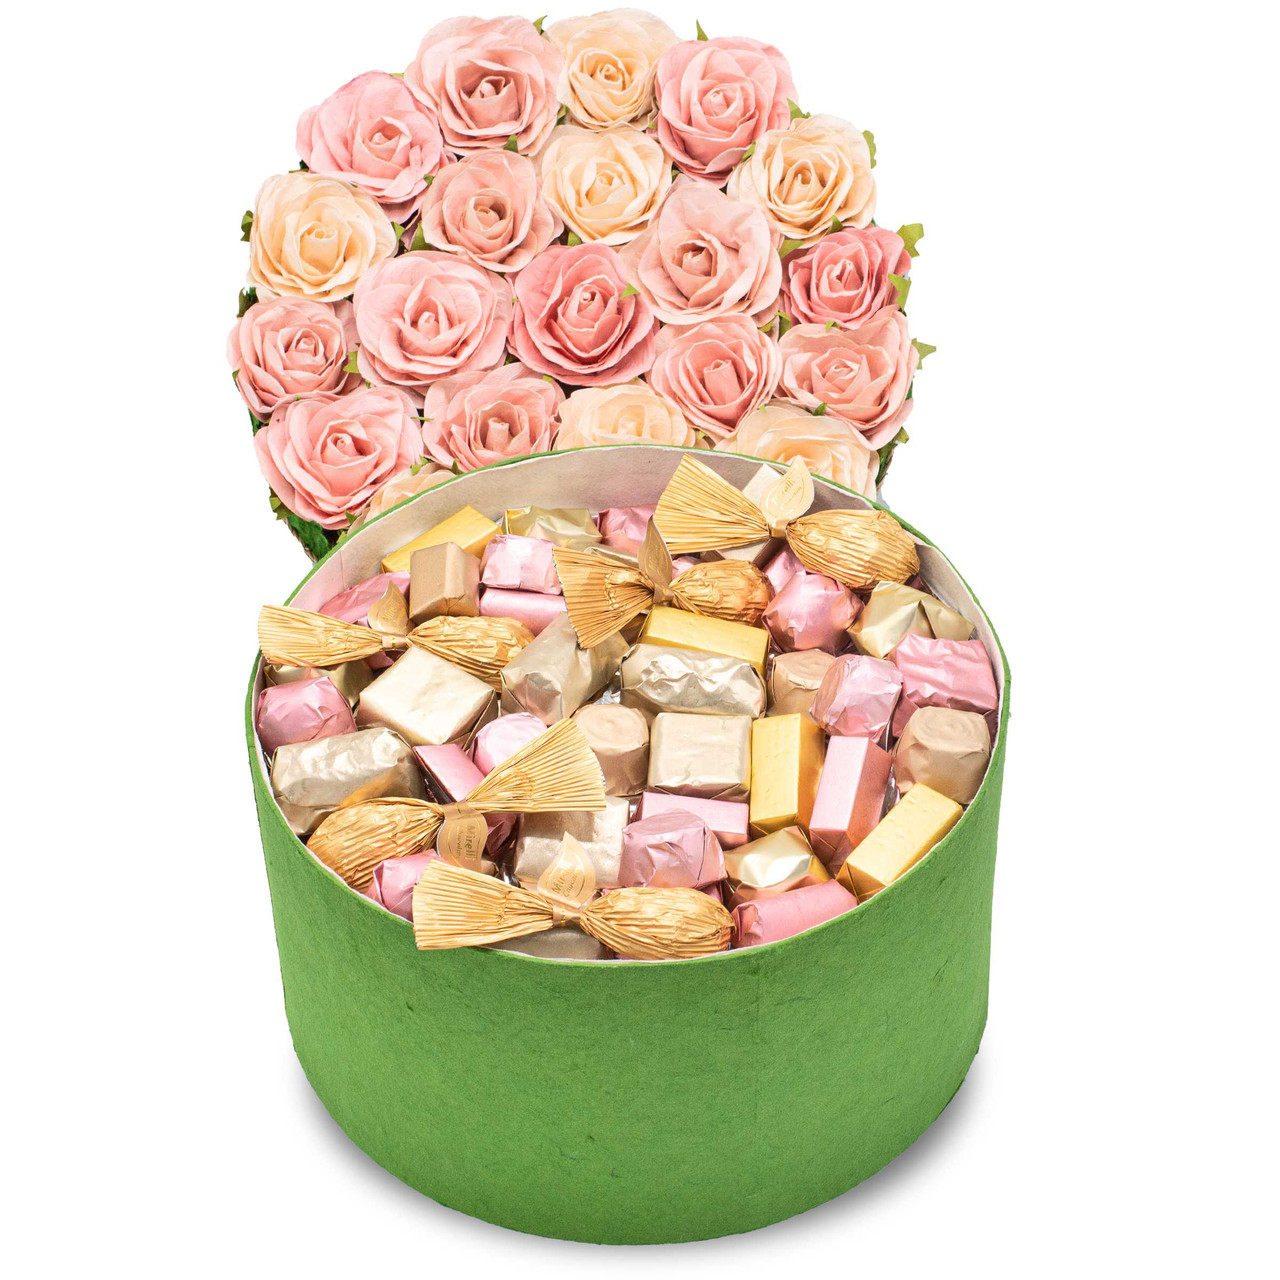 Candy flowers, Chocolate flowers bouquet, Flowers bouquet gift